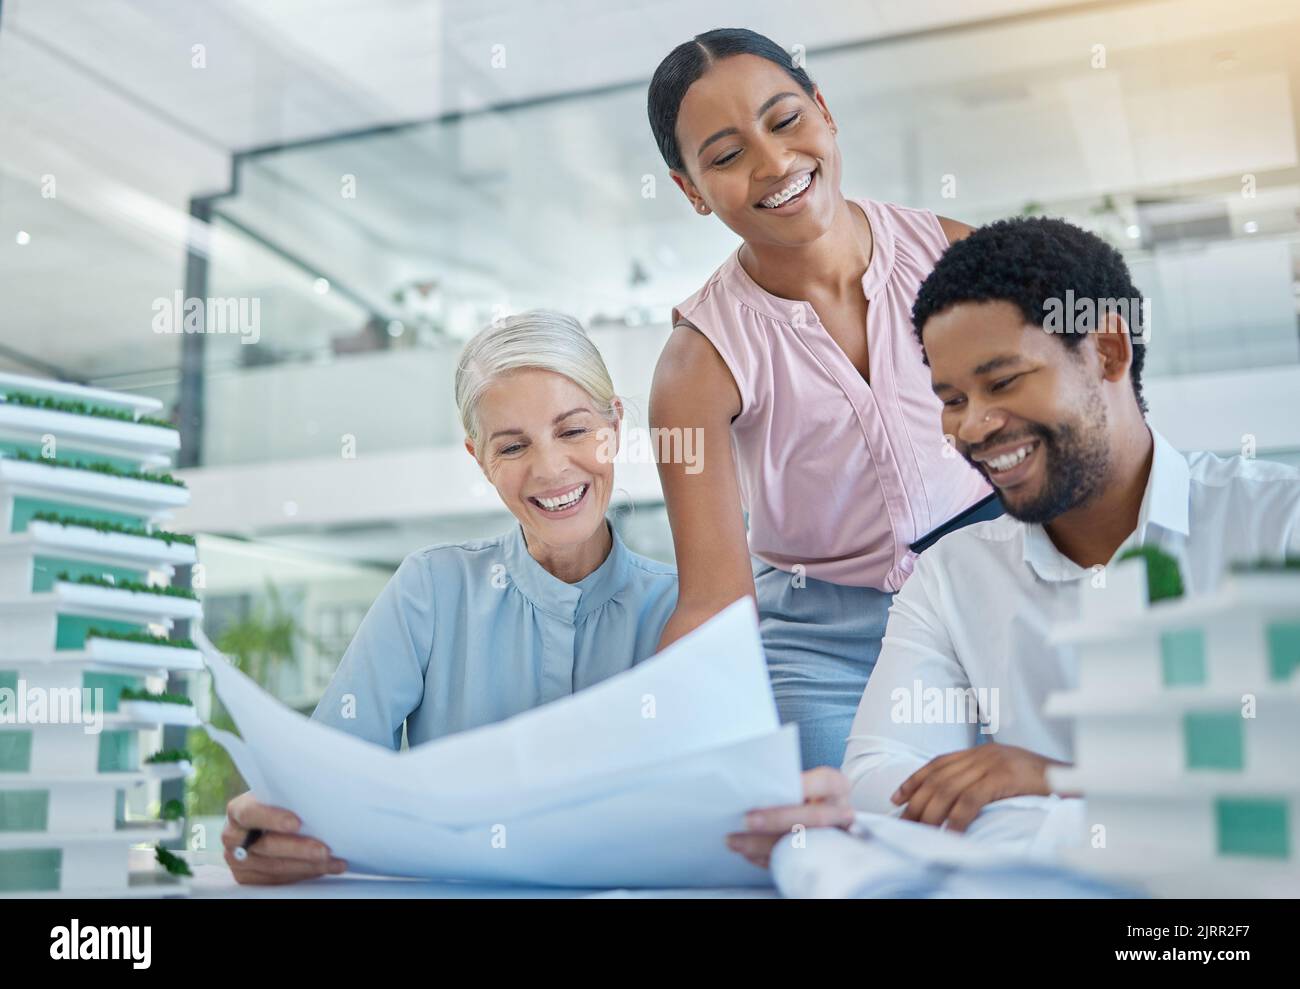 Architecture, designer and happy engineering team speak of their development office building project blueprint on paper. Smile, model and teamwork in Stock Photo